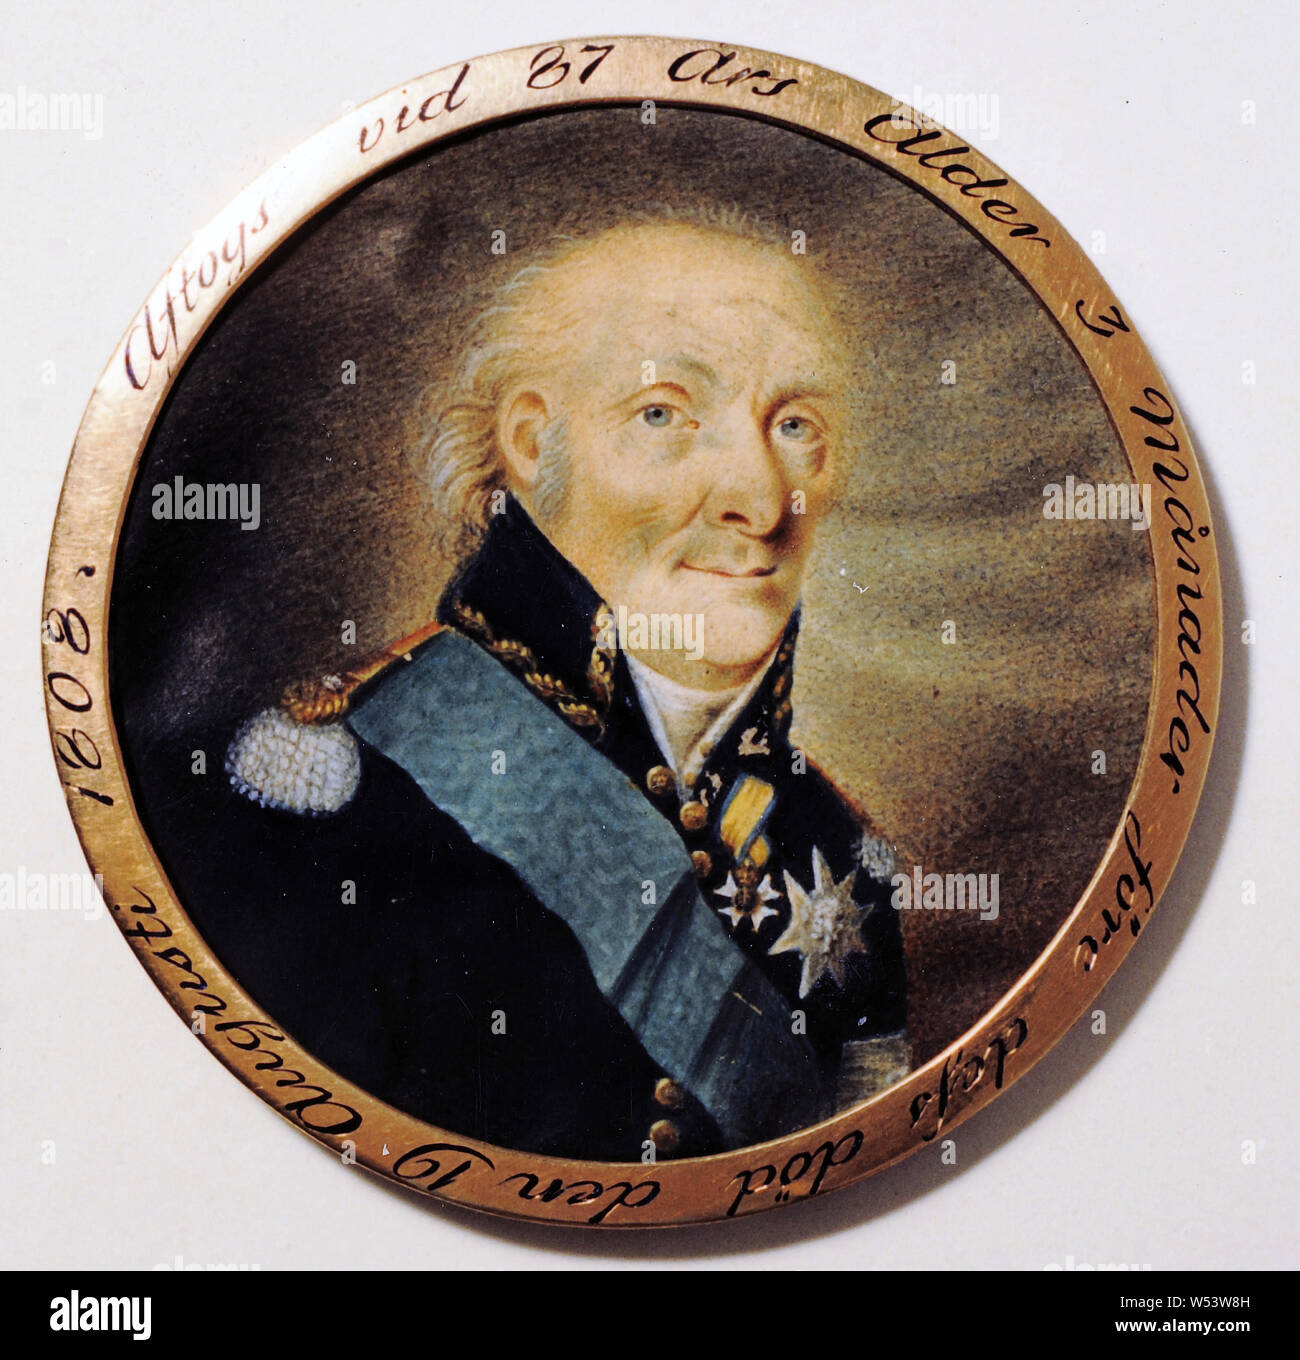 Anders Gustaf Andersson, Portrait of Vice Admiral Fredrik Henrik af Chapman, 1808, Portrait of Deputy Admiral Fredrik Henrik af Chapman, painting, portrait, Watercolor on parchment, Height, 6.9 cm (2.7, inch), Inscription, was taken at 87 Years of age 3 months before its death on August 19, 1808., on the metal frame Stock Photo